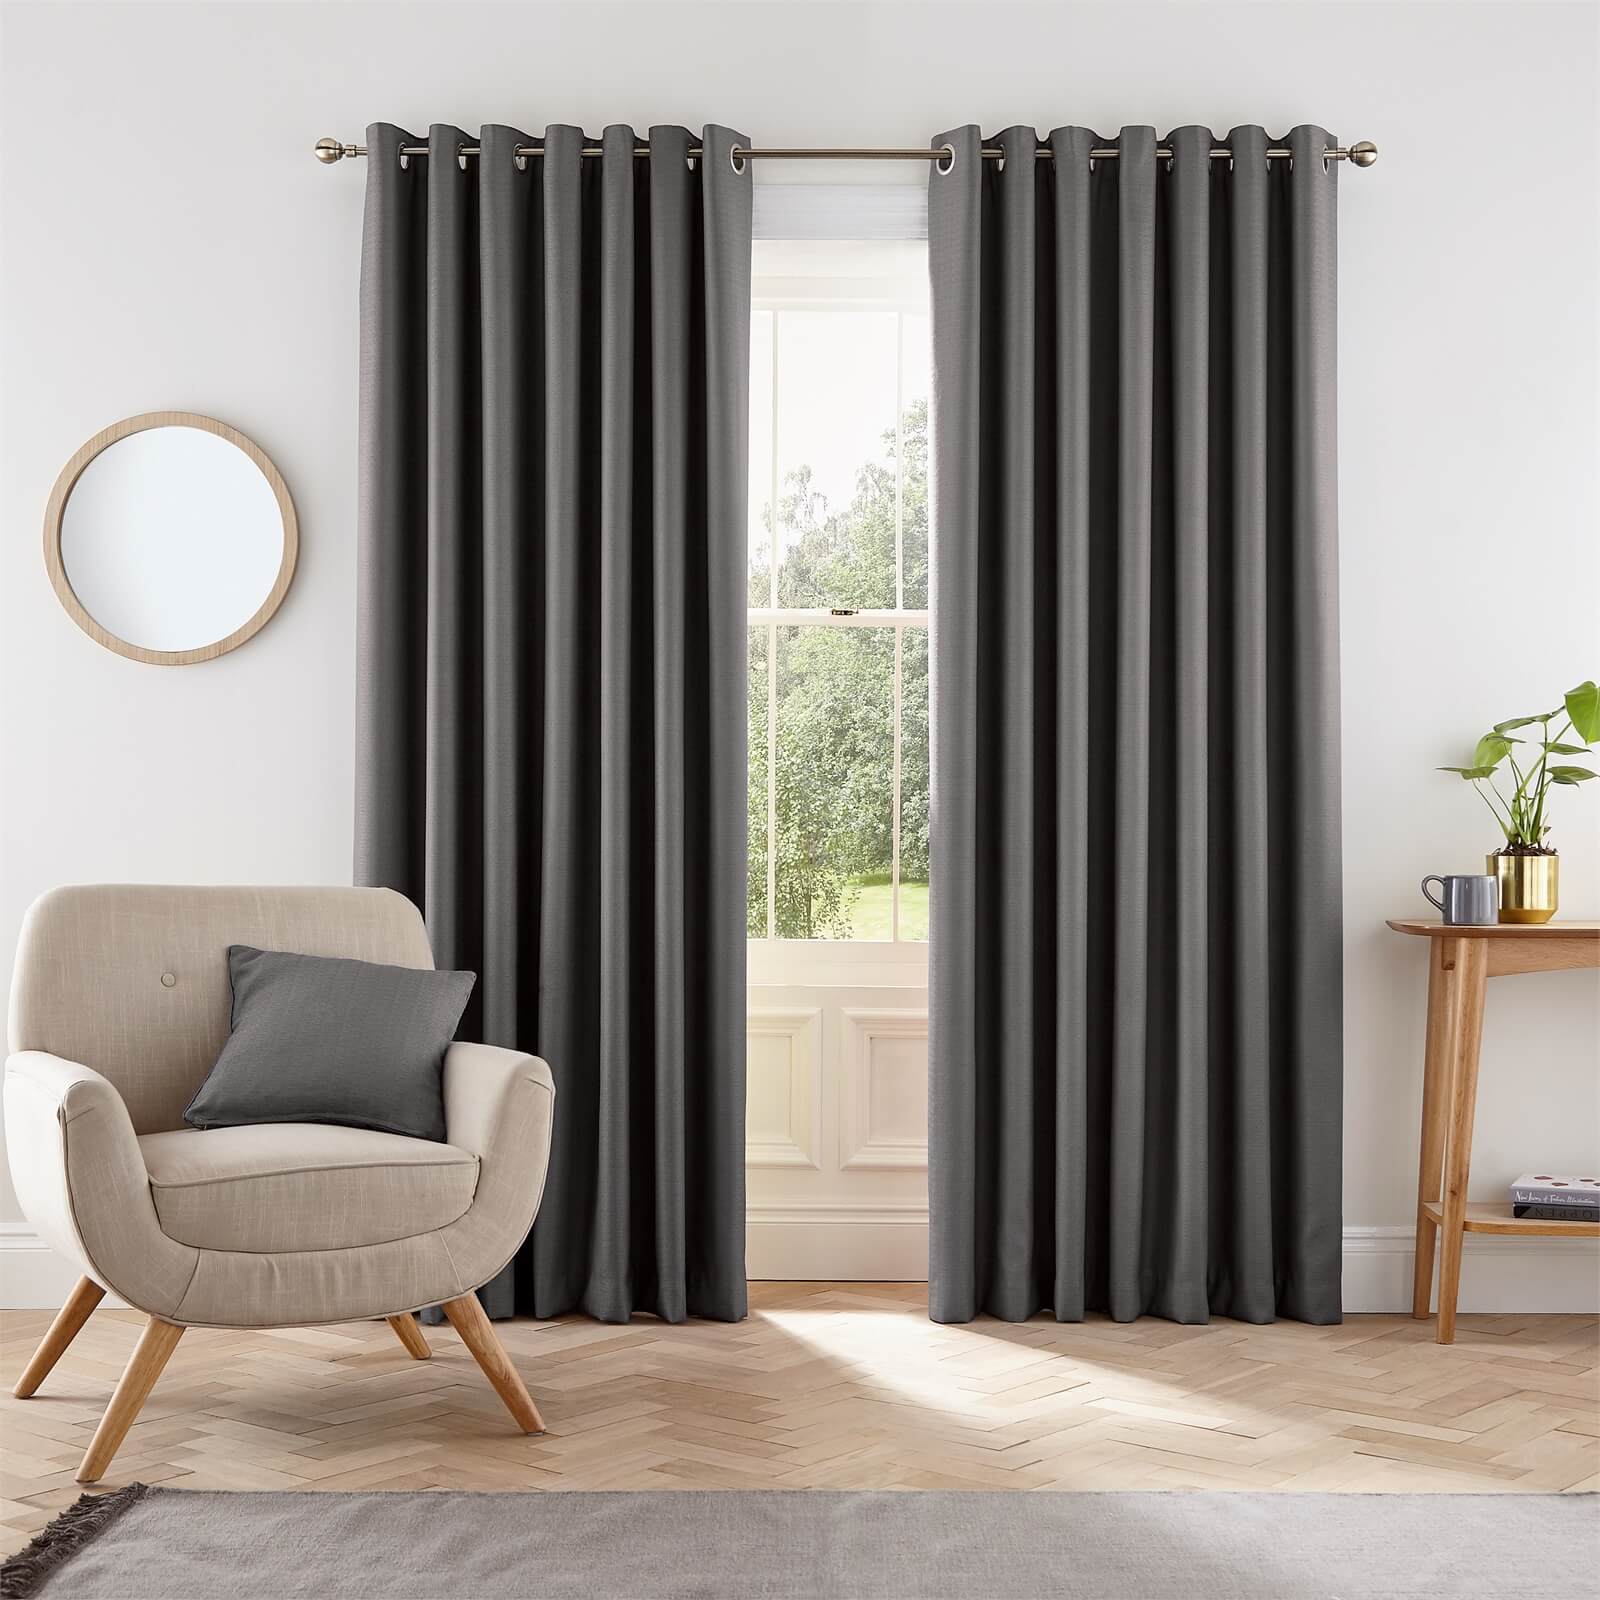 Helena Springfield Eden Lined Curtains 66 x 72 - Charcoal